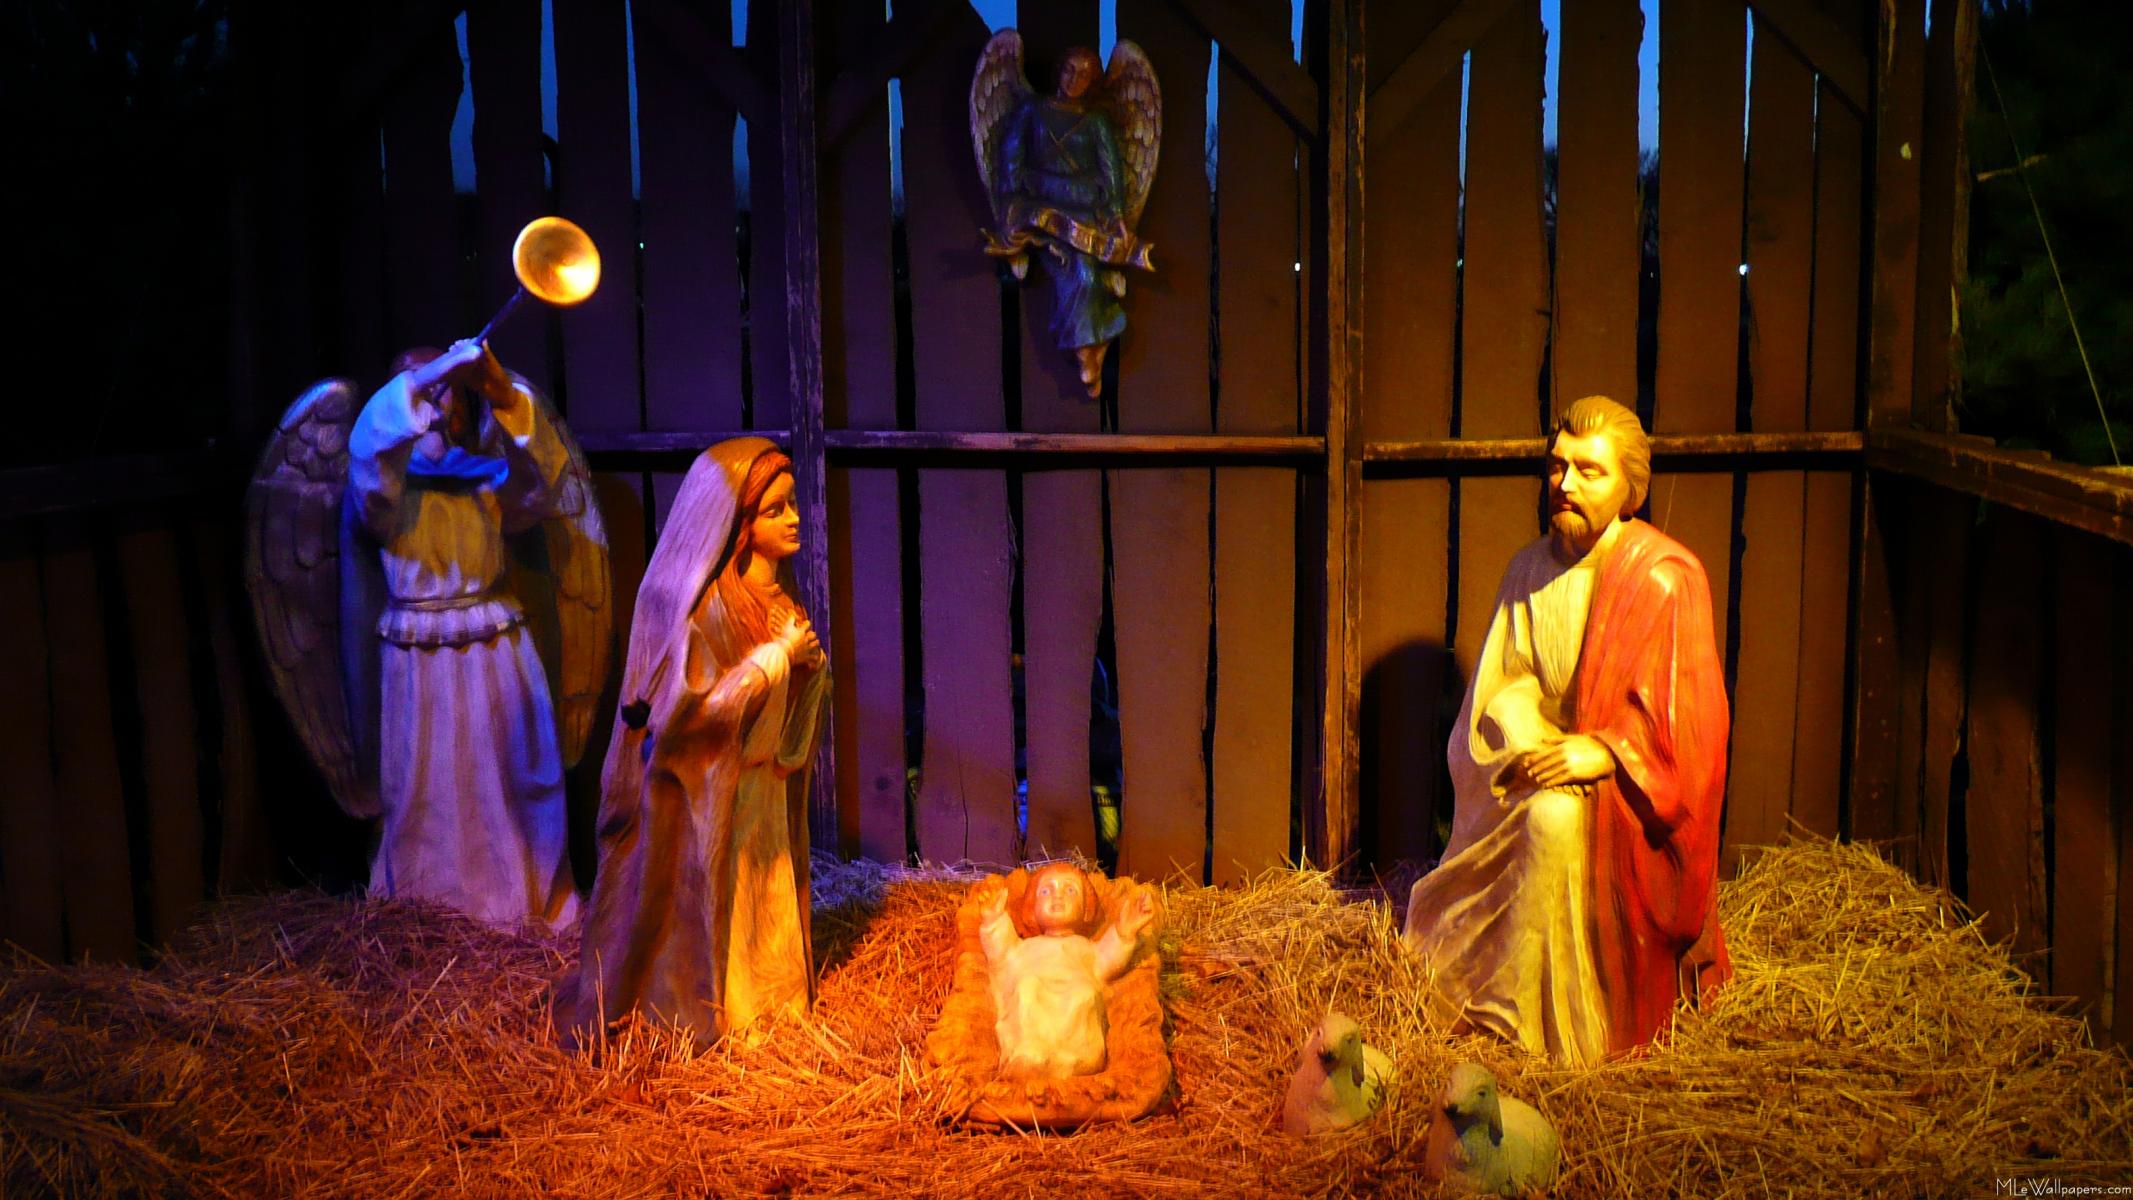 Here is a picture of the Nativity scene at the National Christmas Tree 